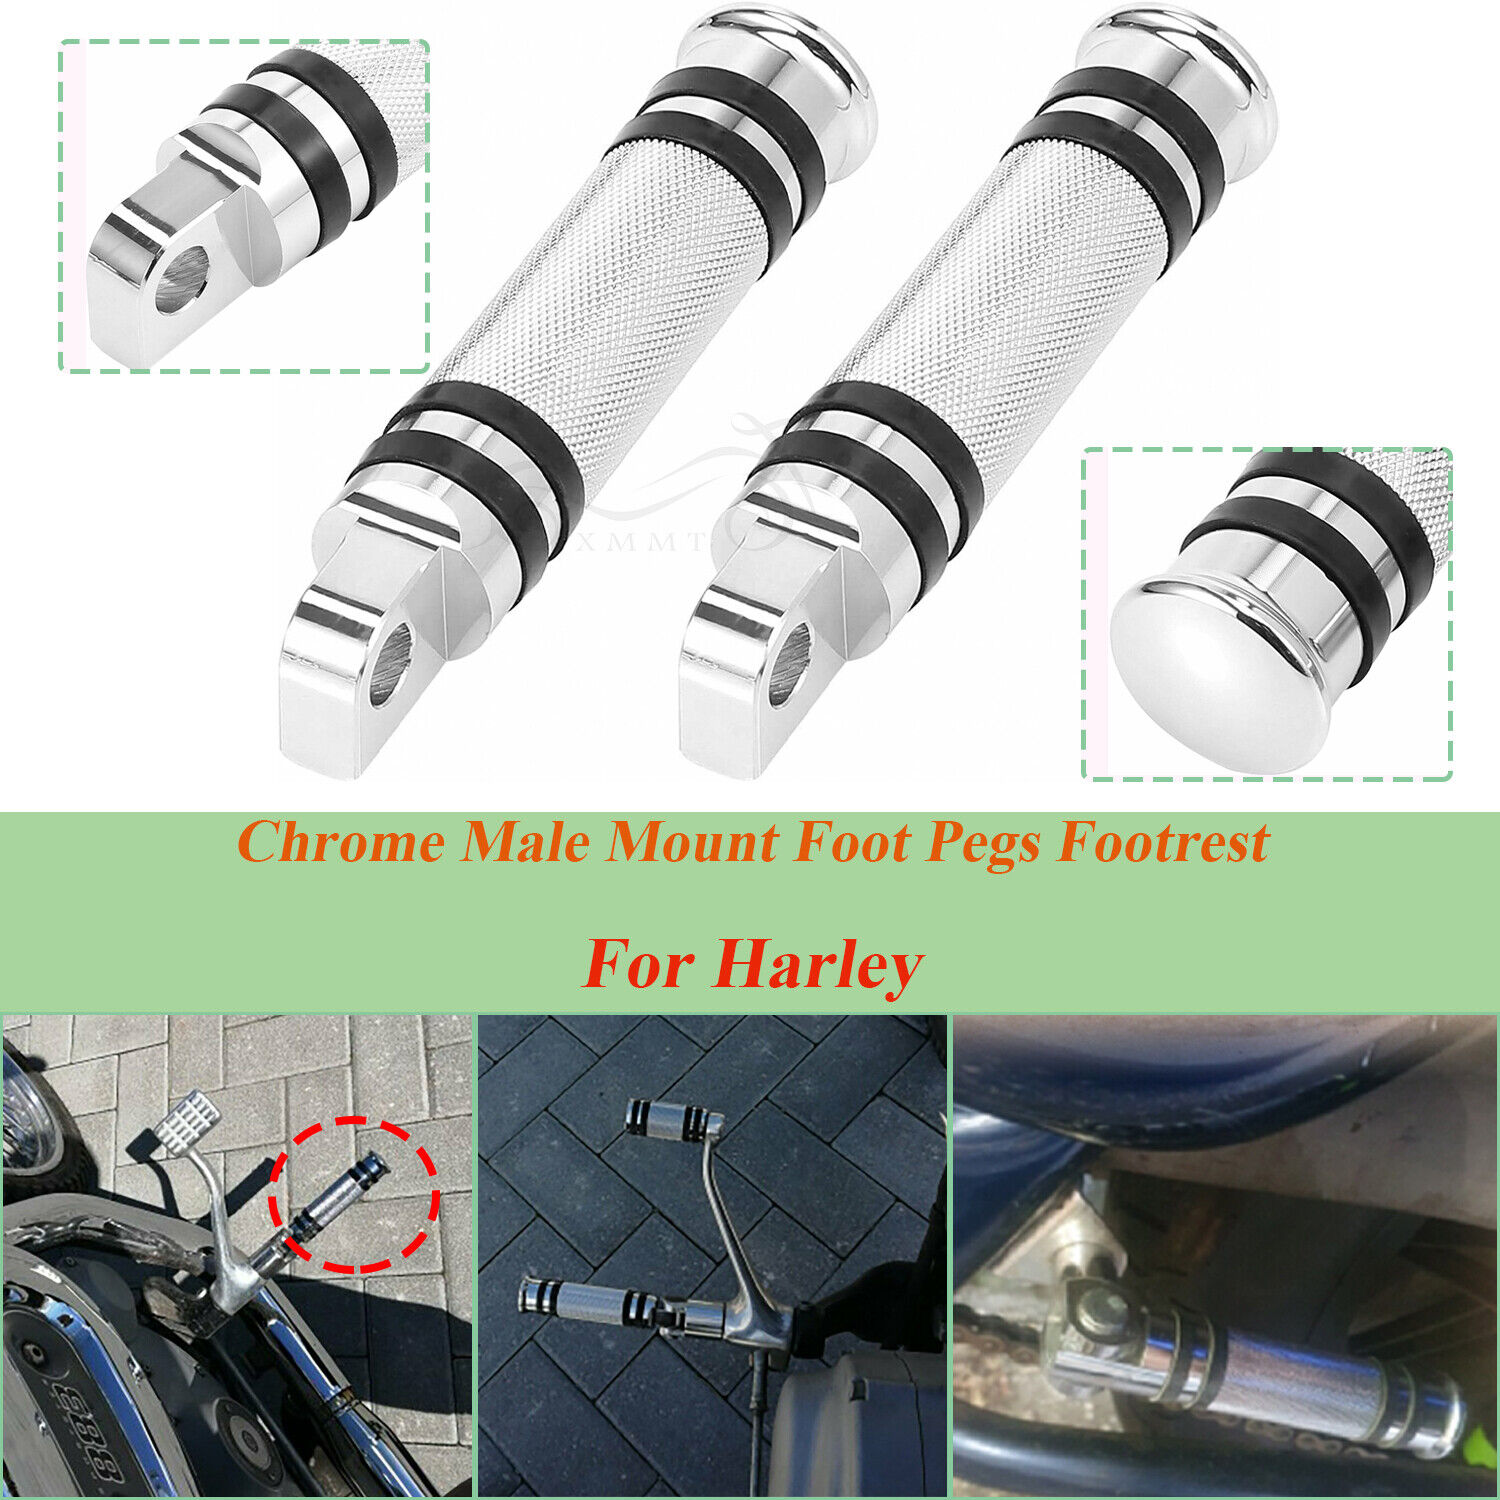 Chrome Male Mount Foot Pegs Rest for Harley Dyna Softail Touring Sportster V-Rod